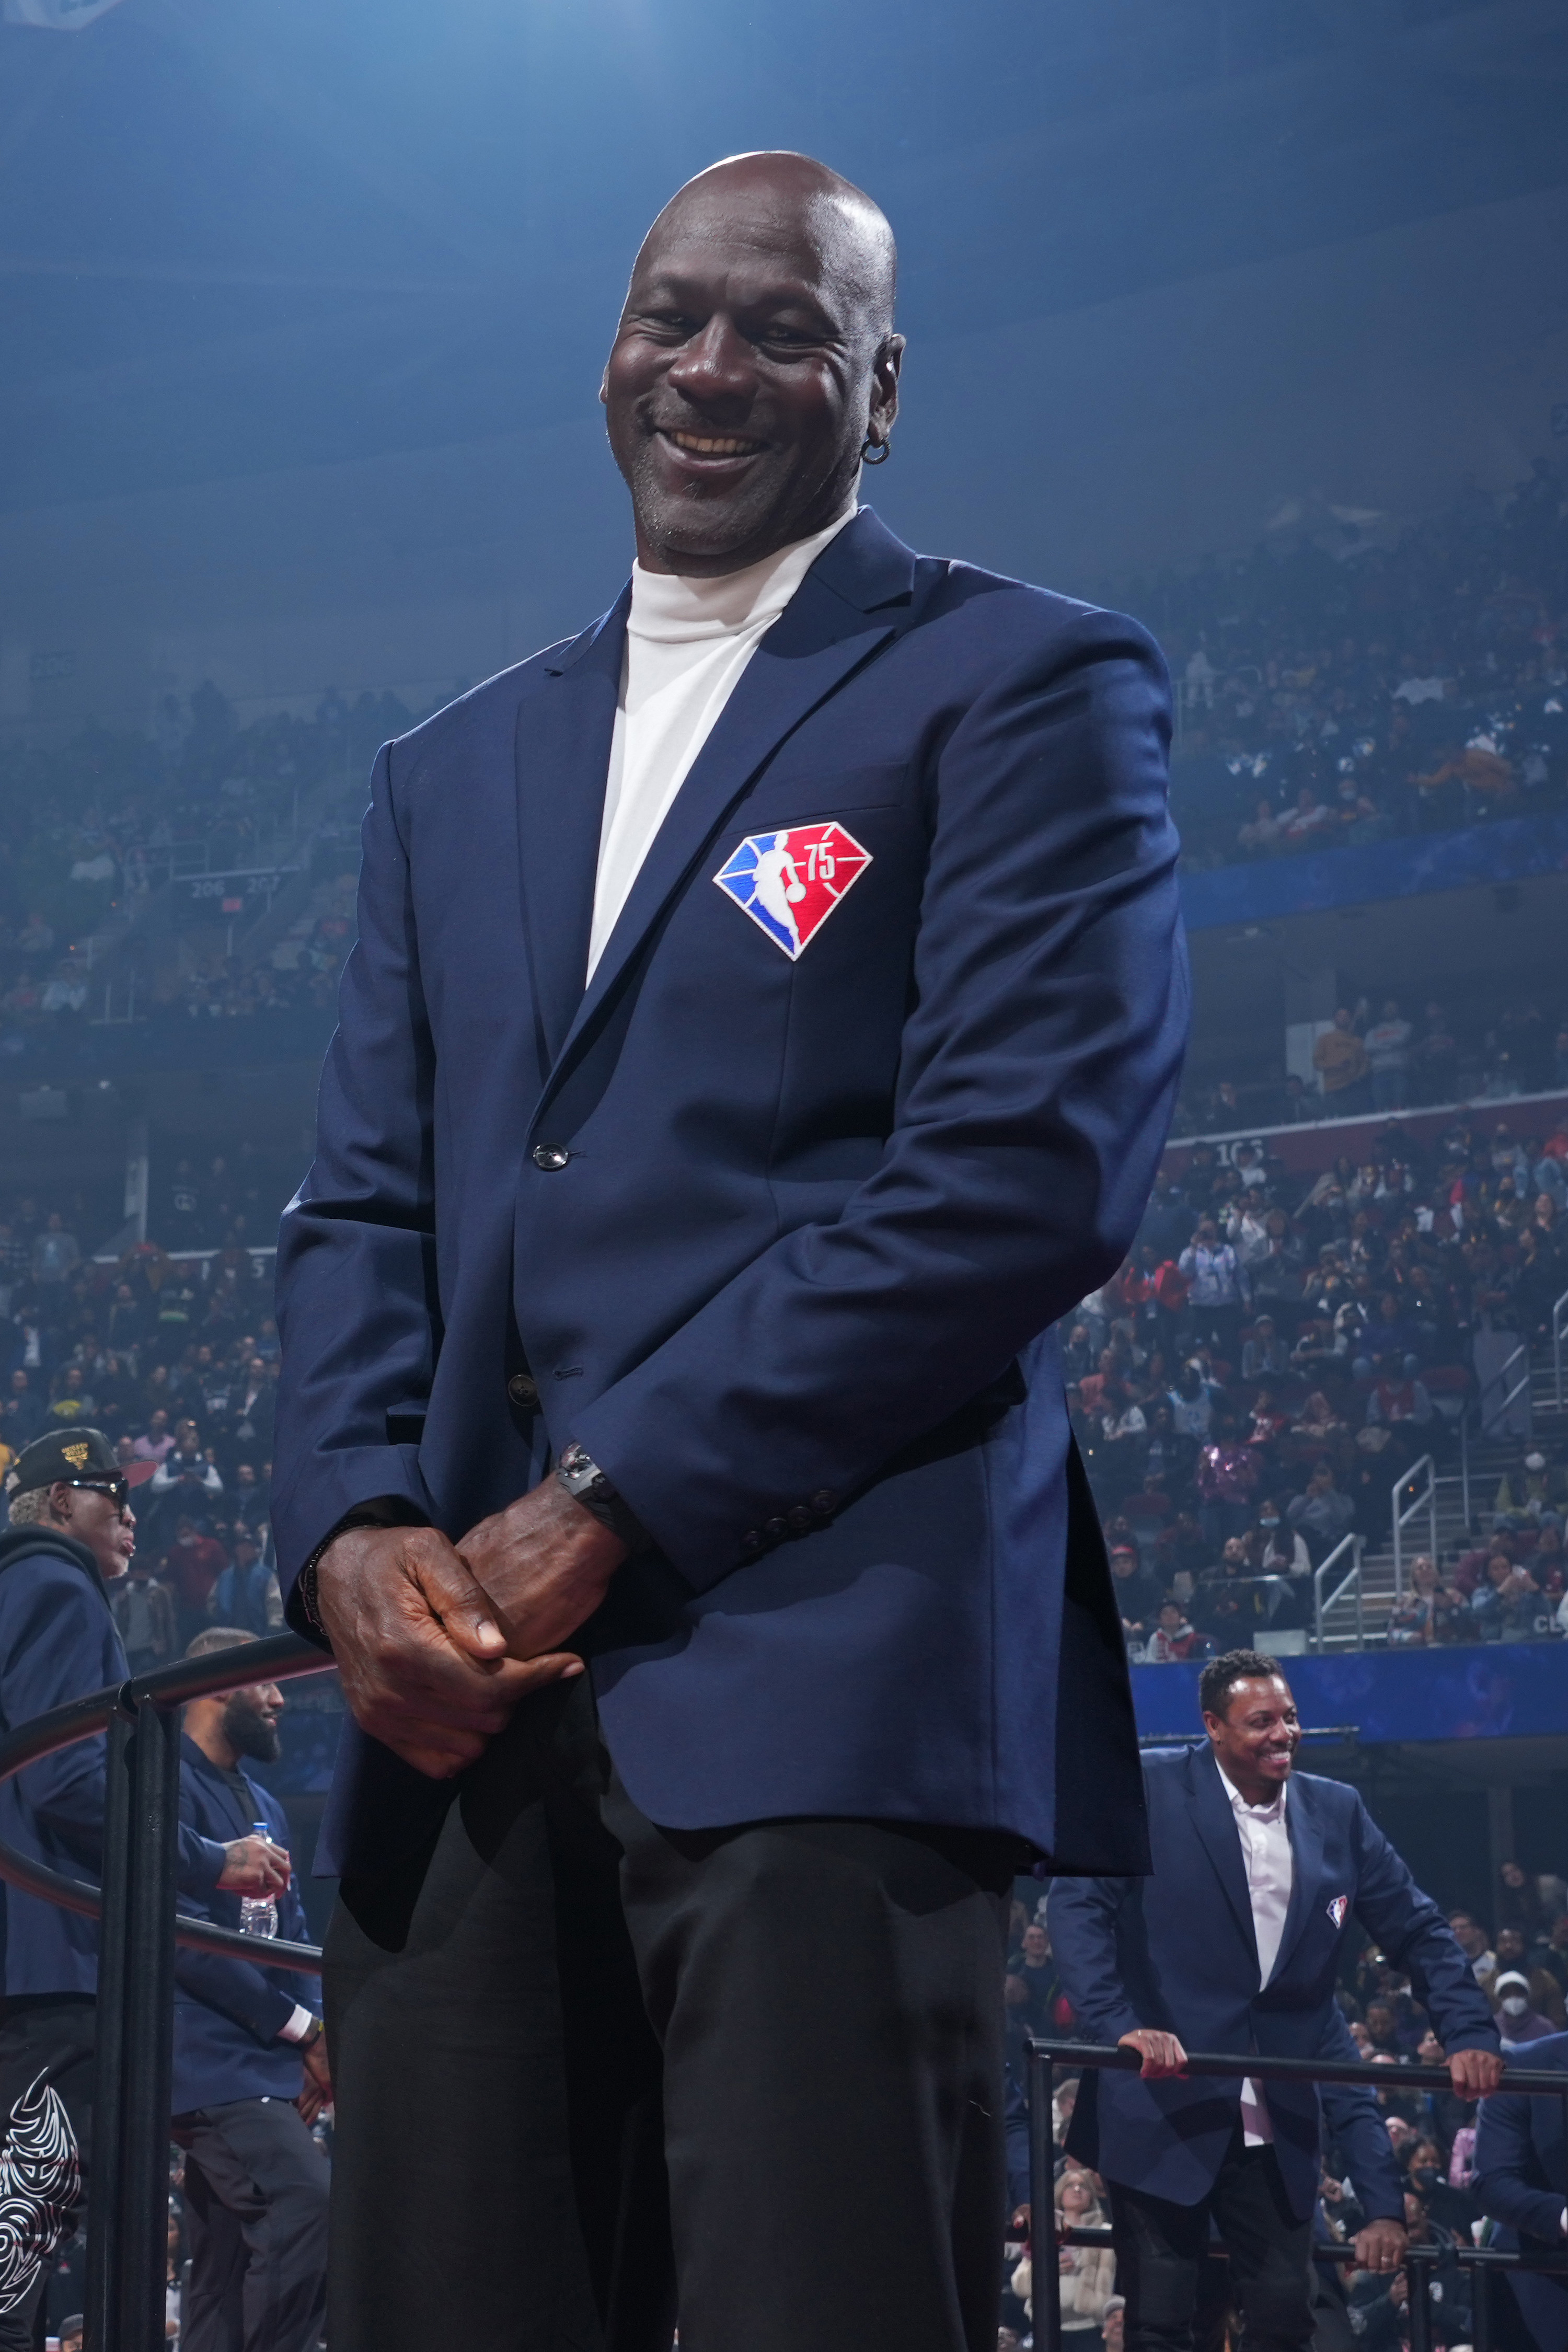 Michael Jordan is pictured while being honored at an NBA 75th Anniversary celebration event in  2022